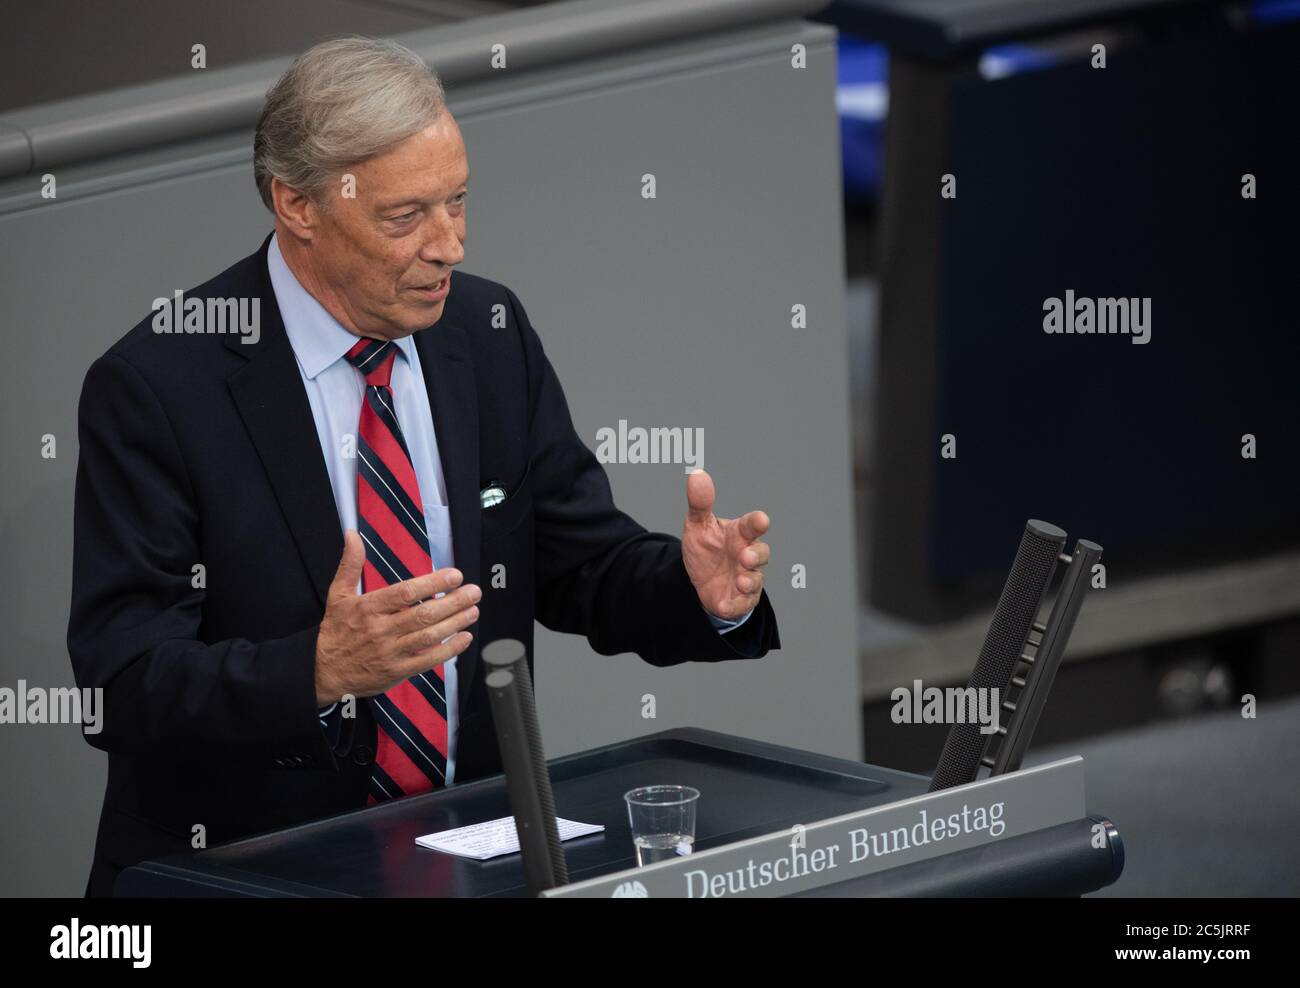 Berlin, Germany. 03rd July, 2020. Armin-Paulus Hampel (AfD) speaks at the plenary session in the German Bundestag. The main topics of the 171st session of the 19th legislative period are the adoption of the Coal Exit Act, a topical hour on the excesses of violence in Stuttgart, as well as debates on electoral law reform, the protection of electronic patient data, the welfare of farm animals and the German chairmanship of the UN Security Council. Credit: Christophe Gateau/dpa/Alamy Live News Stock Photo